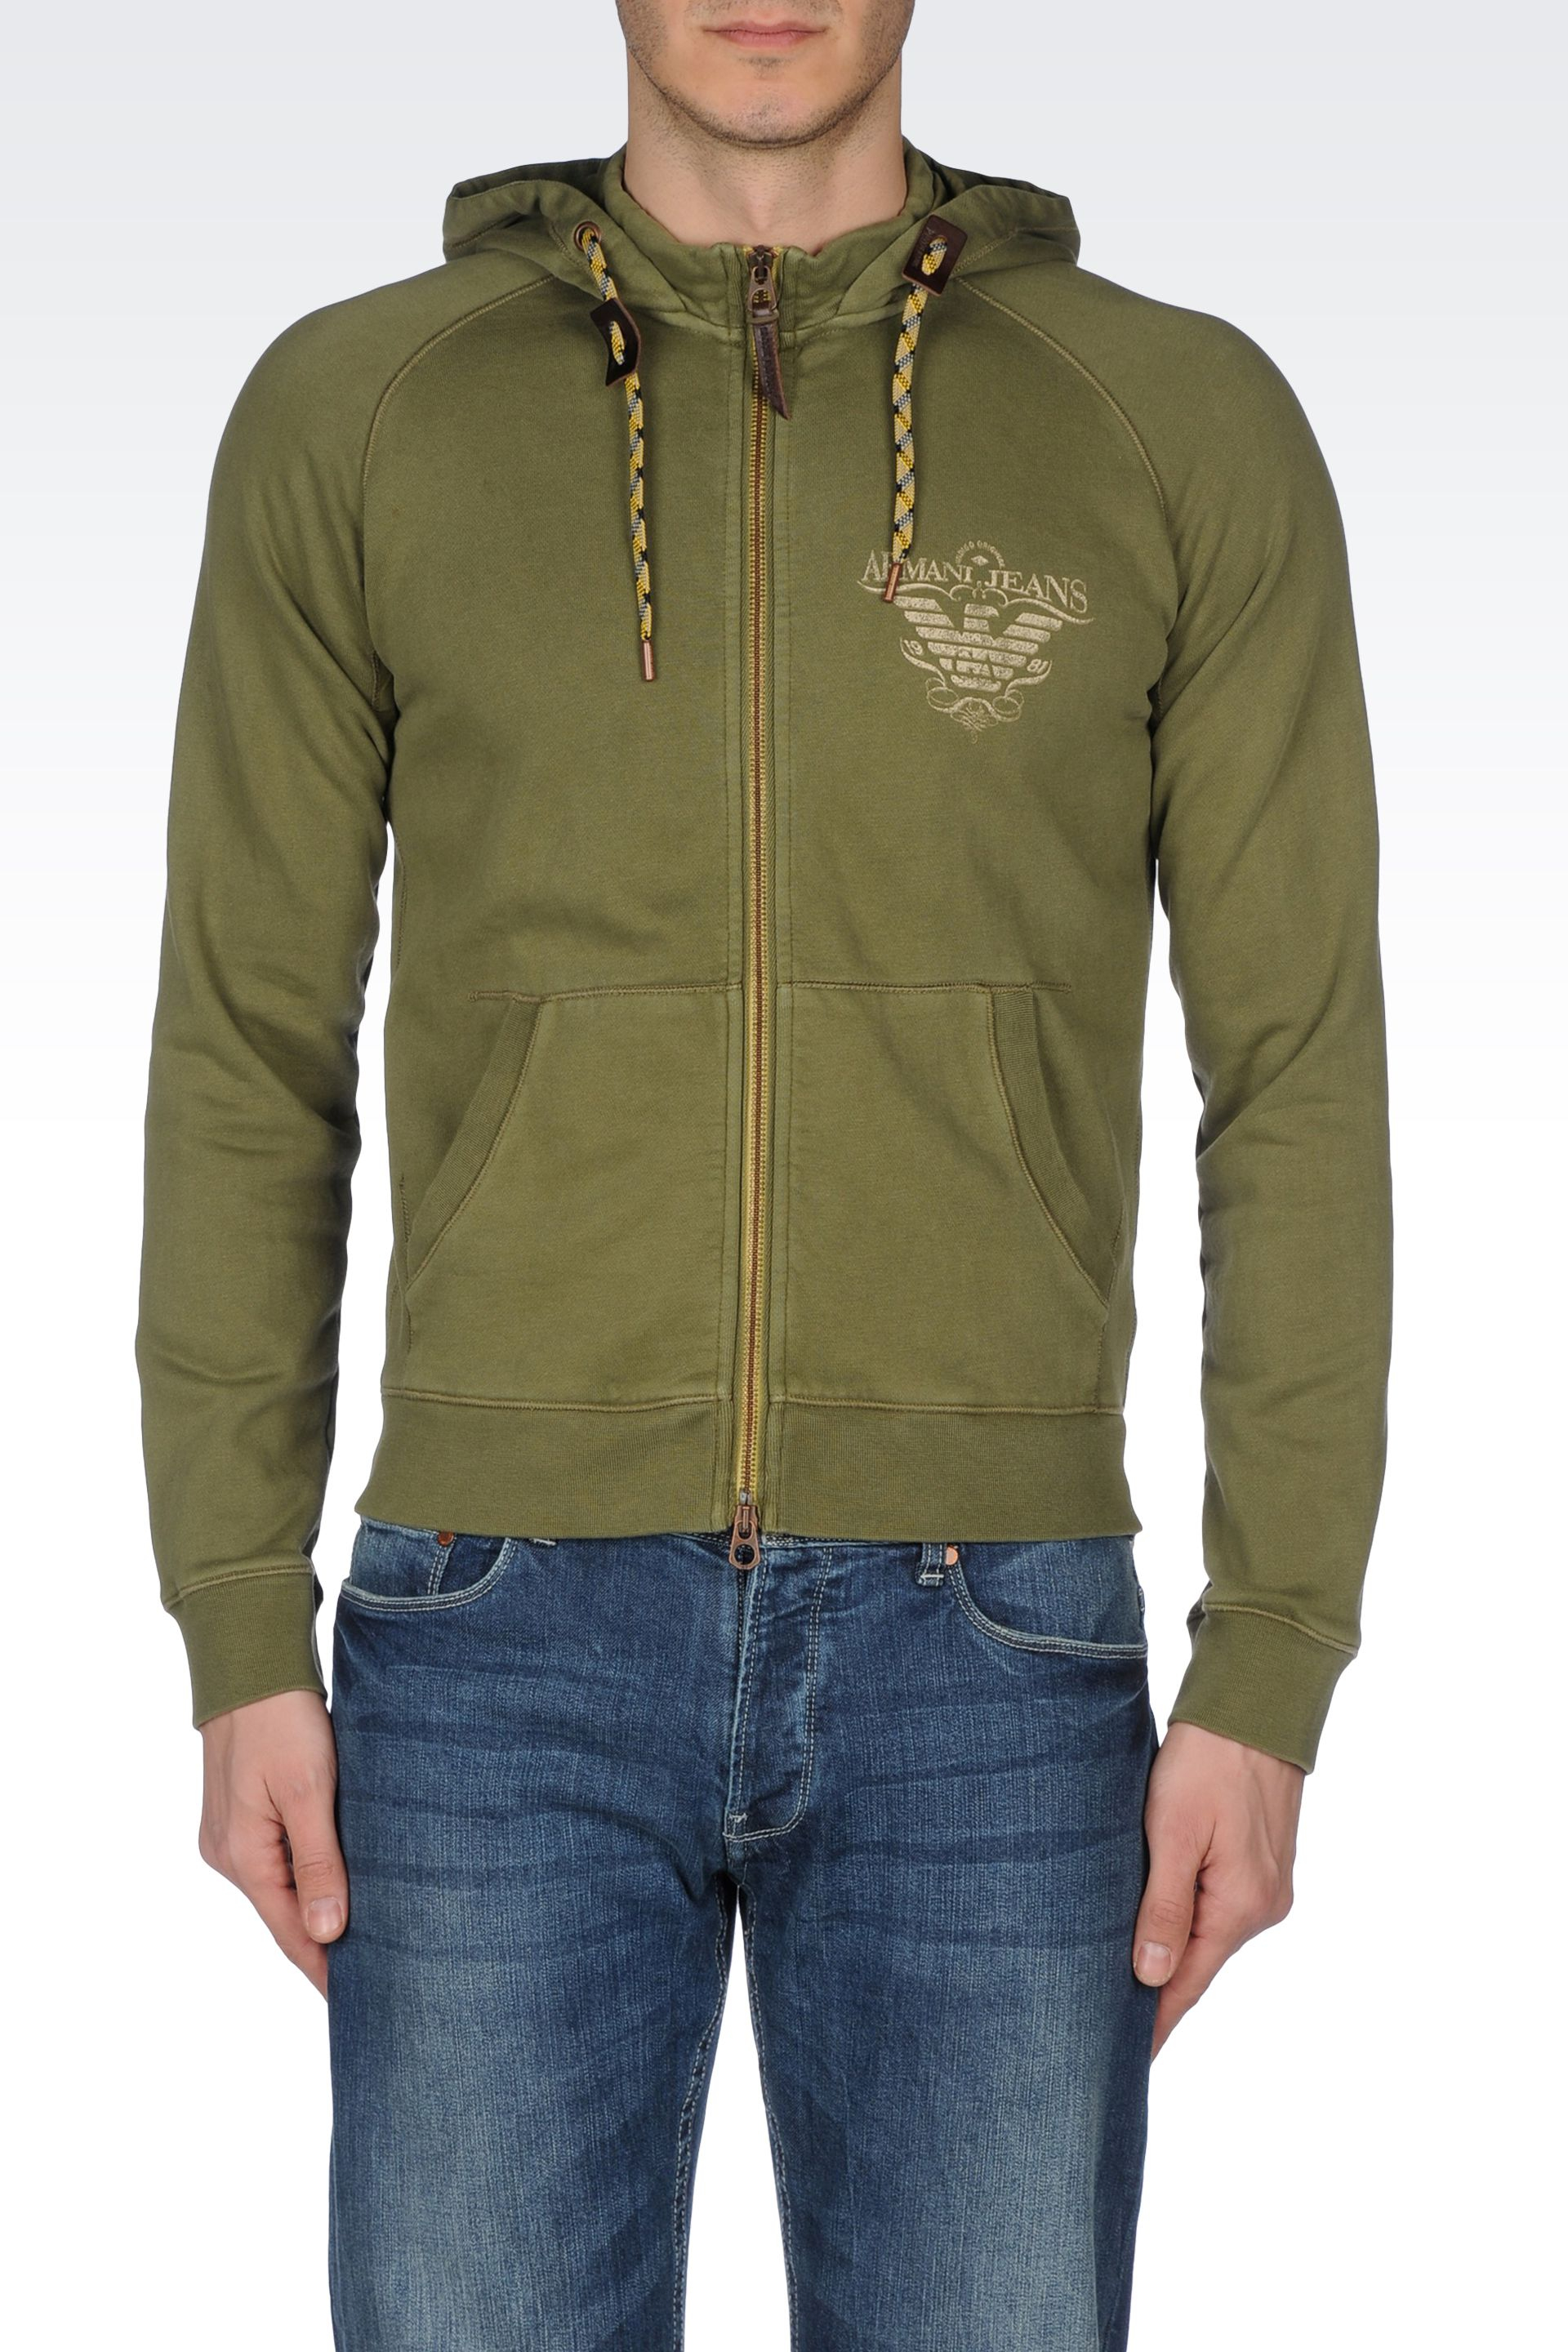 Lyst - Armani Jeans Hoodie in Green for Men